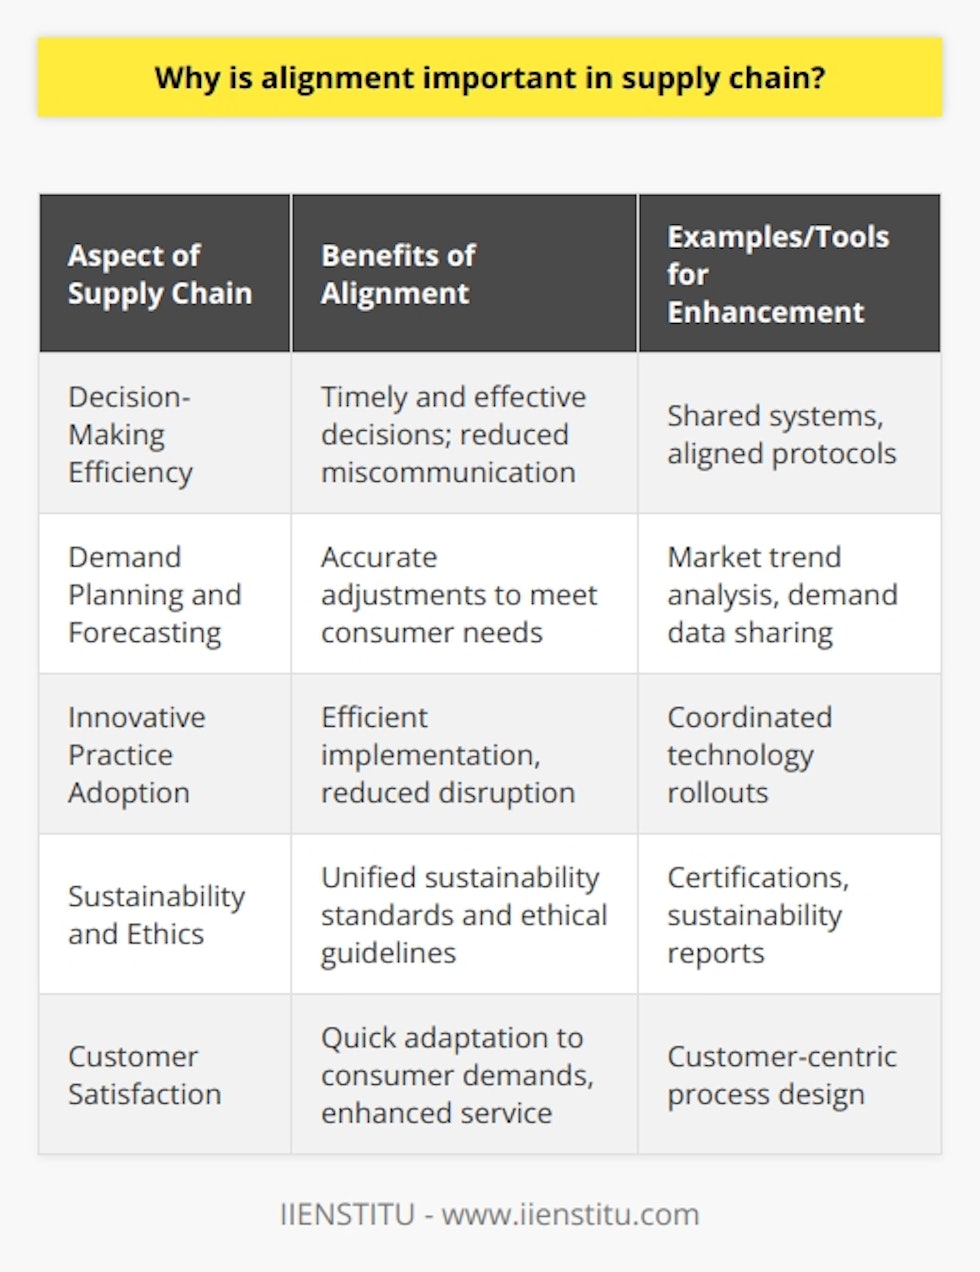 Supply chain alignment represents the strategic congruence and harmonious operation among the myriad of entities involved in delivering products and services from supplier to customer. Effective alignment is vital as it helps ensure that each element of the supply chain is working towards a unified set of goals, ultimately resulting in improved overall performance.Why Supply Chain Alignment MattersAlignment in the supply chain is especially significant due to the complexity of contemporary production and distribution networks. In a global landscape, ensuring that suppliers, manufacturers, distributors, and retailers work in sync is no small feat, yet it’s essential for the smooth functioning of the supply chain.Firstly, alignment aids in synchronizing decision-making processes. Coherent policies and operating procedures across the supply chain result in timely and effective decisions. For instance, if a supplier is attuned to the manufacturer's inventory levels thanks to shared systems and aligned protocols, it can adjust its production schedules accordingly to prevent overproduction or delays.Moreover, alignment is indispensable for demand planning and forecasting. When all parties have a consistent understanding of market trends and demand data, the entire supply chain can adjust and prepare to meet consumer needs with precision. This alignment is particularly crucial in an era where consumer preferences shift rapidly and unpredictably.Incorporating innovative practices can also be more effective in a well-aligned supply chain. All parties need to evolve with changing technologies and business models, and alignment ensures that innovations are adopted in a coordinated manner, allowing for a more efficient implementation and reducing the likelihood of disruption.Finally, environmental and ethical considerations are increasingly important. Alignment is essential here, as it helps to ensure that all entities adhere to the same sustainability standards and ethical guidelines, reducing any detrimental impact and improving the overall image and credibility of the supply chain.Role of Alignment in Enhancing Supply Chain FunctionsStrategic alignment enhances various dimensions of supply chain operations:- **Inventory Management:** Well-aligned systems facilitate better inventory control, preventing understocking or overstocking through shared information regarding stock levels and turnover rates.- **Logistics and Transportation:** Coordinated planning among shippers and carriers can result in cost savings, improved scheduling, and reduced environmental impact due to optimized routing and load consolidation.- **Supplier Relations:** A proactive alignment strategy fosters stronger, more collaborative relationships with suppliers, which can lead to better pricing, priority treatment, and innovations in product design and delivery.- **Customer Focus:** Ultimately, alignment helps build a more customer-centric supply chain, which can adapt more quickly to consumer demands and provide more value-added services.IIENSTITU and Advancing Supply Chain AlignmentEducational platforms such as IIENSTITU play a pivotal role in advancing supply chain alignment. By providing courses and training tailored to the contemporary needs of the supply chain industry, IIENSTITU equips professionals with the necessary know-how to understand and implement alignment strategies. Participants learn to appreciate the significance of synchronized operations, driving home the idea that alignment is not just an operational necessity but also a strategic differentiator.SummaryIn the intricate ballet of modern supply chains, alignment is like the choreography that keeps all the dancers in step. From streamlining operations and optimizing resource utilization to being agile in the face of market turbulence and aligning ethical practices, a synchronized supply chain management approach is indispensable. The rewards for such harmony are manifold—enhanced efficiency, better risk management, greater competitiveness, and, ultimately, delighted customers. Thus, focusing on alignment is not just about avoiding discord; it is about conducting a symphony of supply chain success.